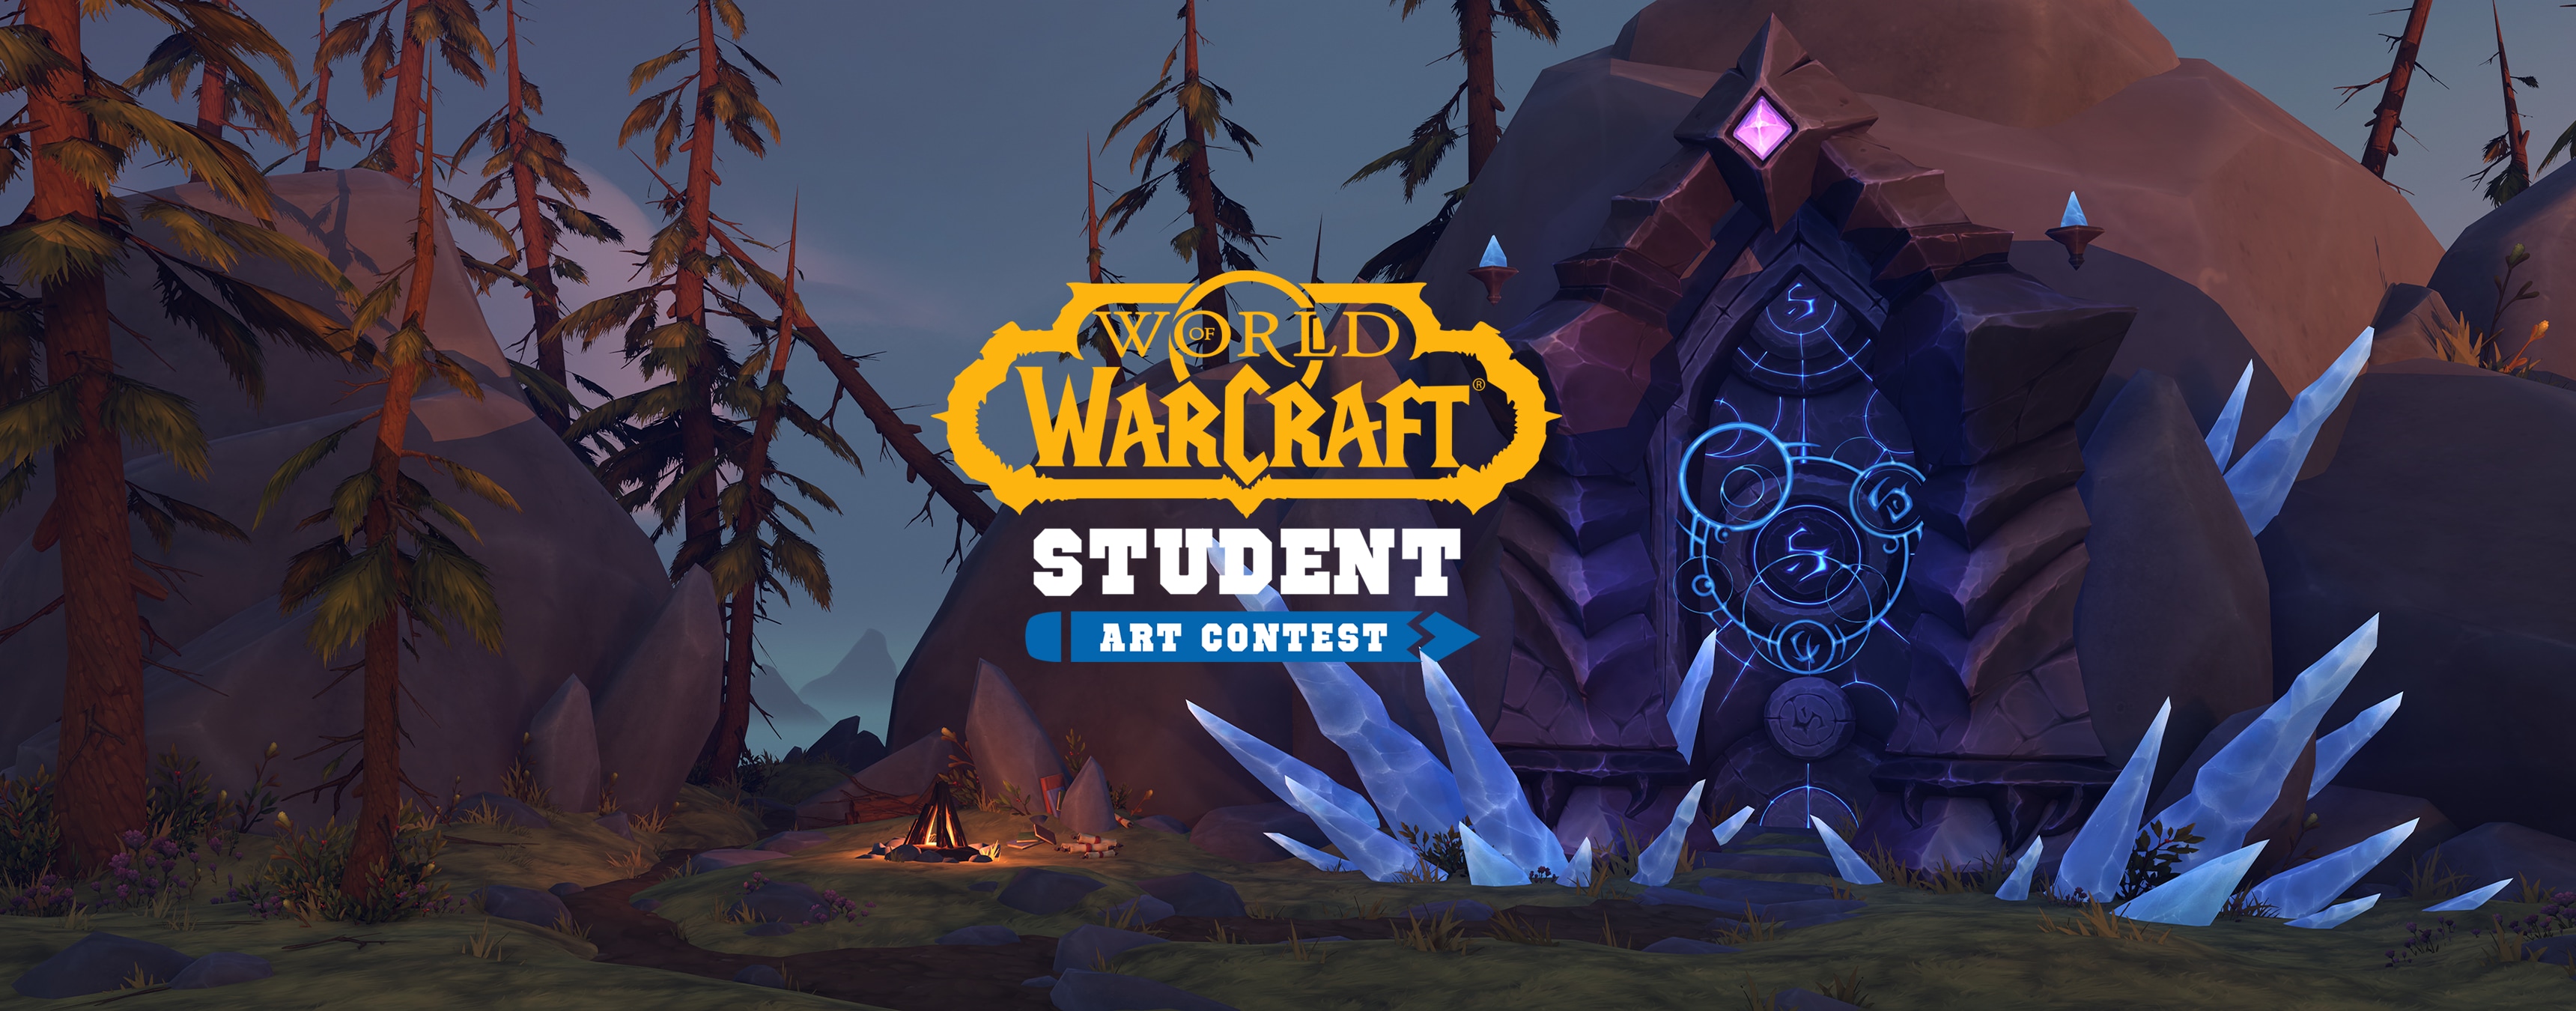 Announcing the World of Warcraft Student Art Contest 2022 Winners!